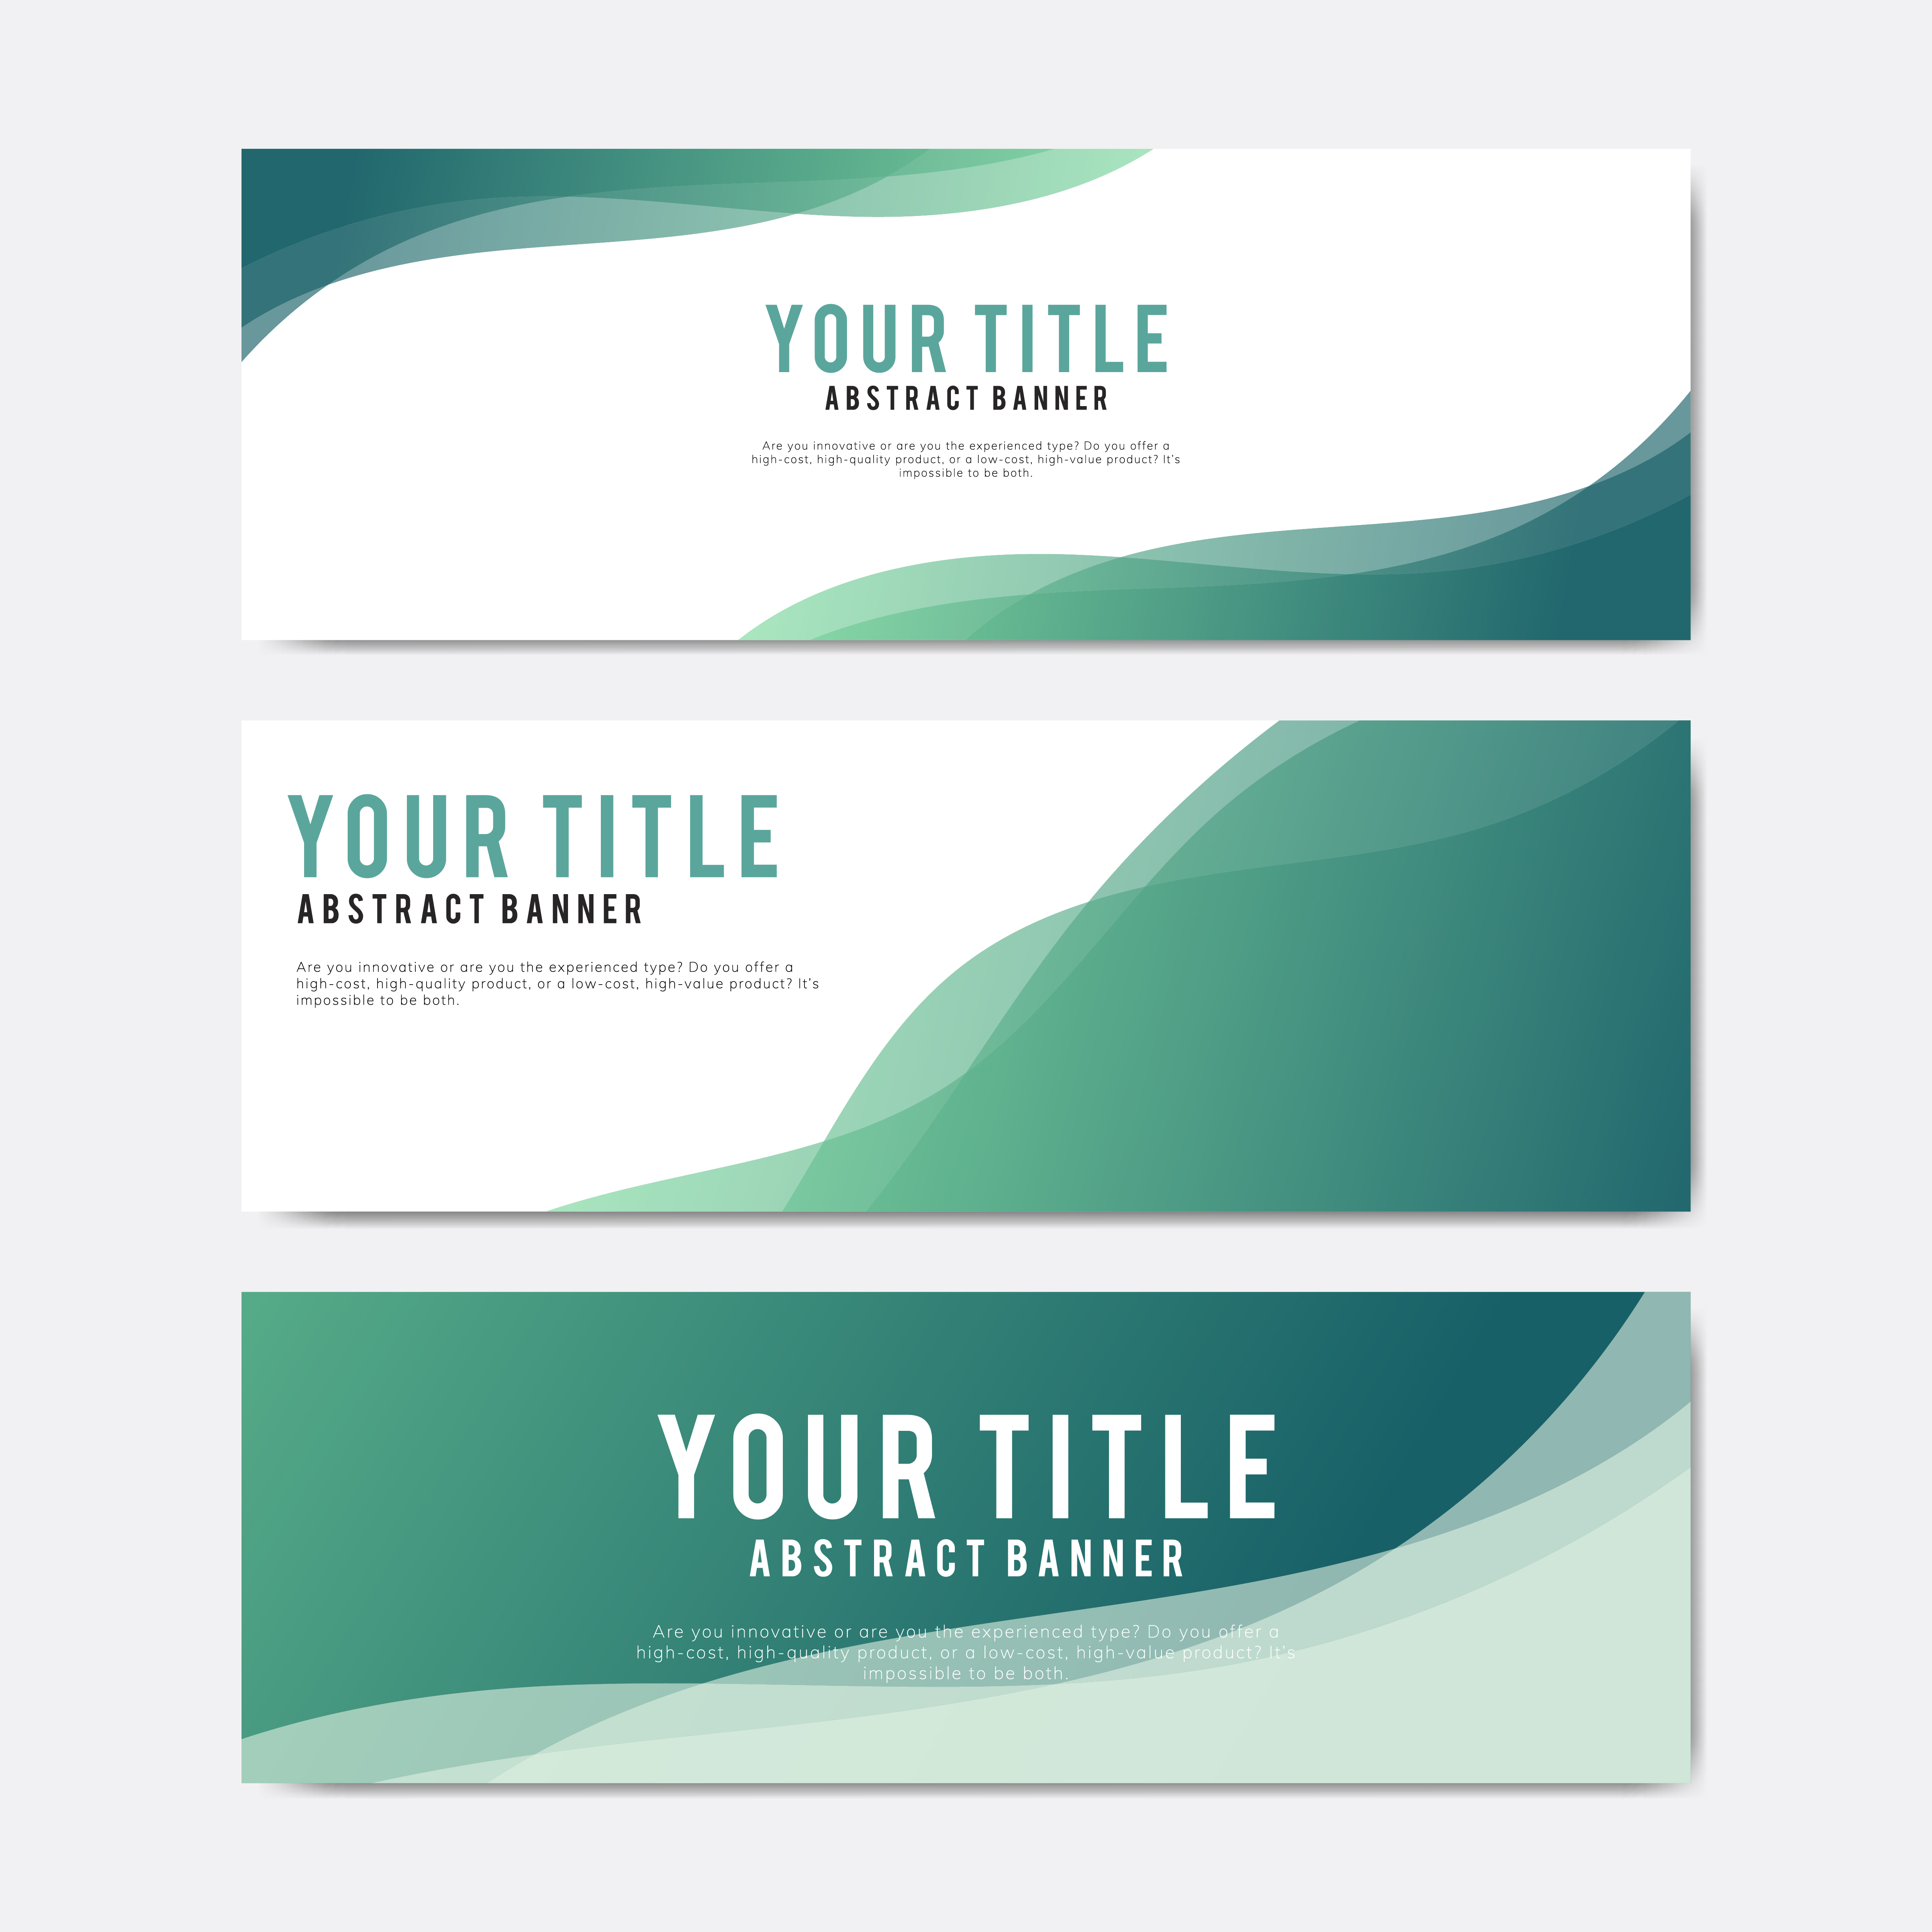 Colorful and abstract banner design templates Download Free Vectors